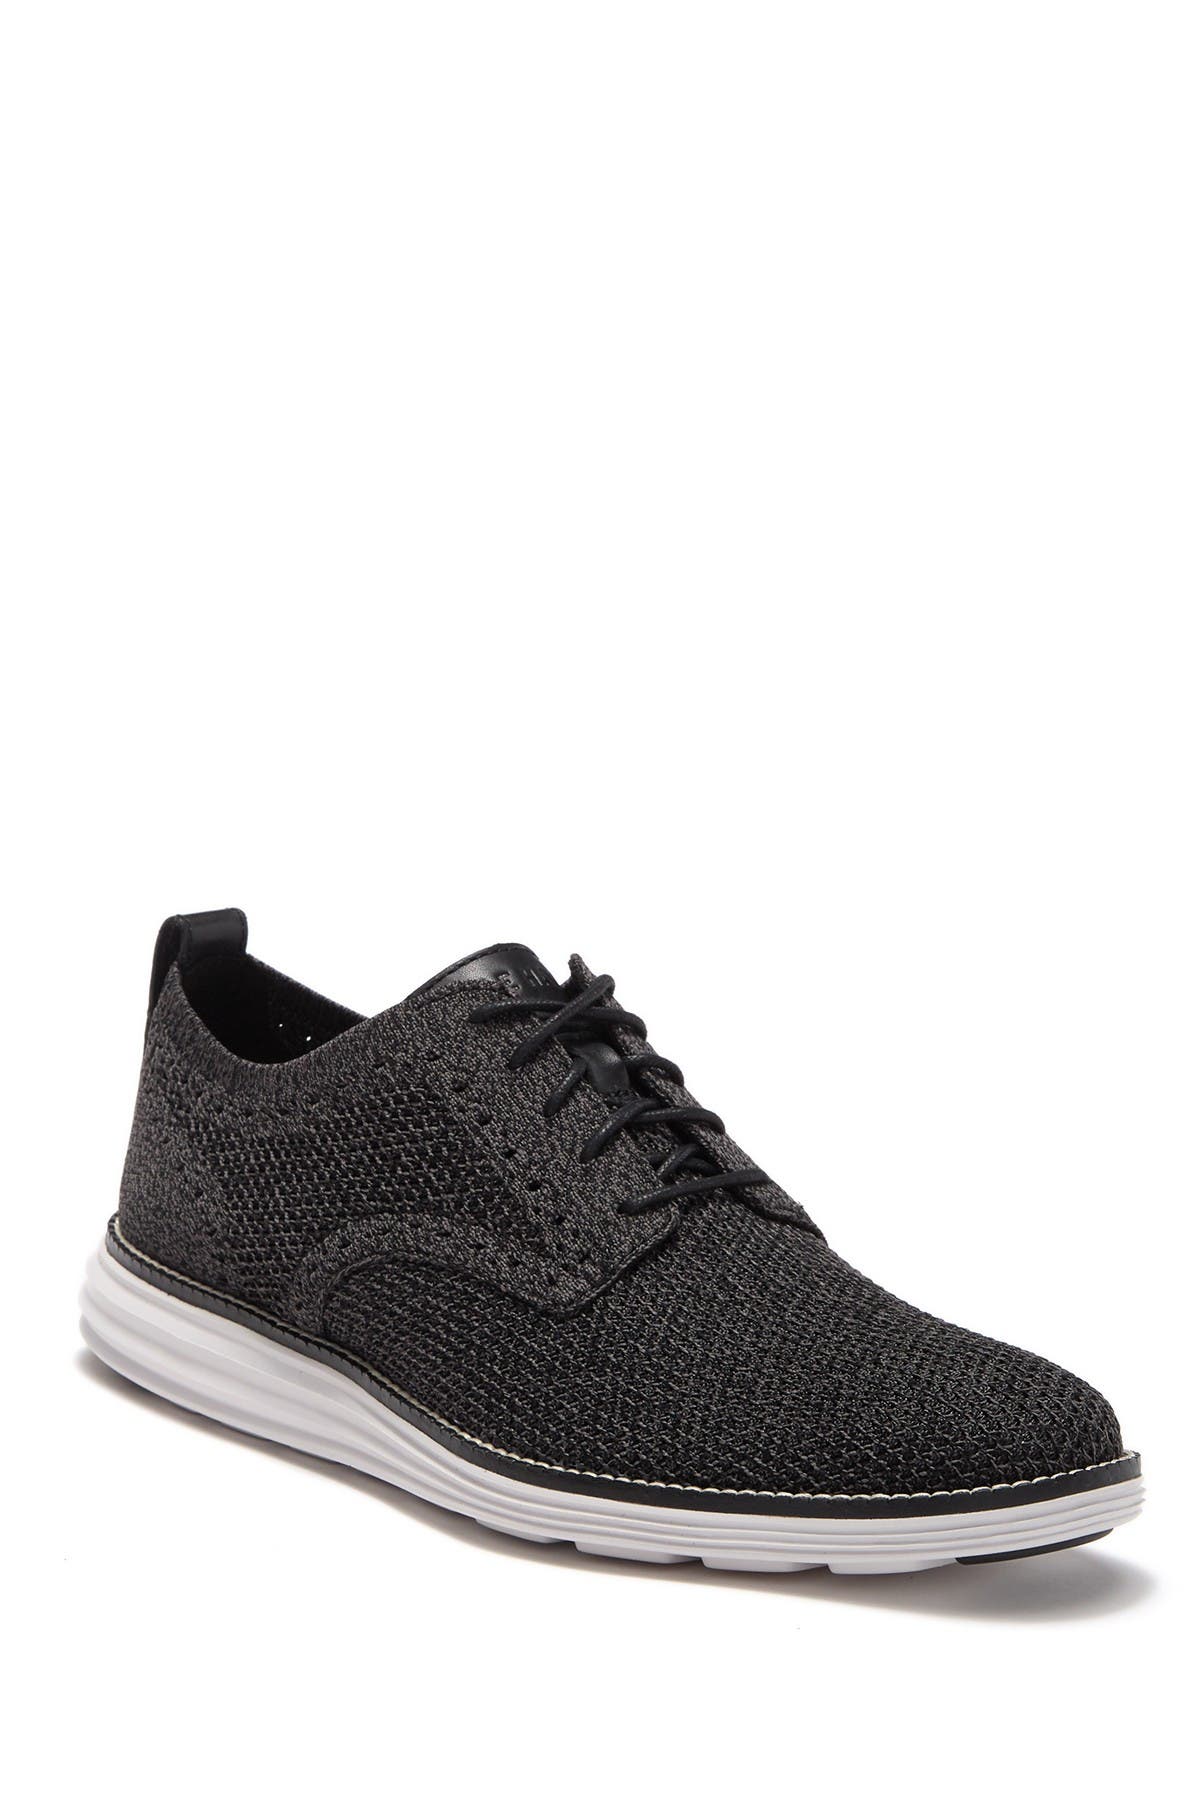 cole haan grand os black